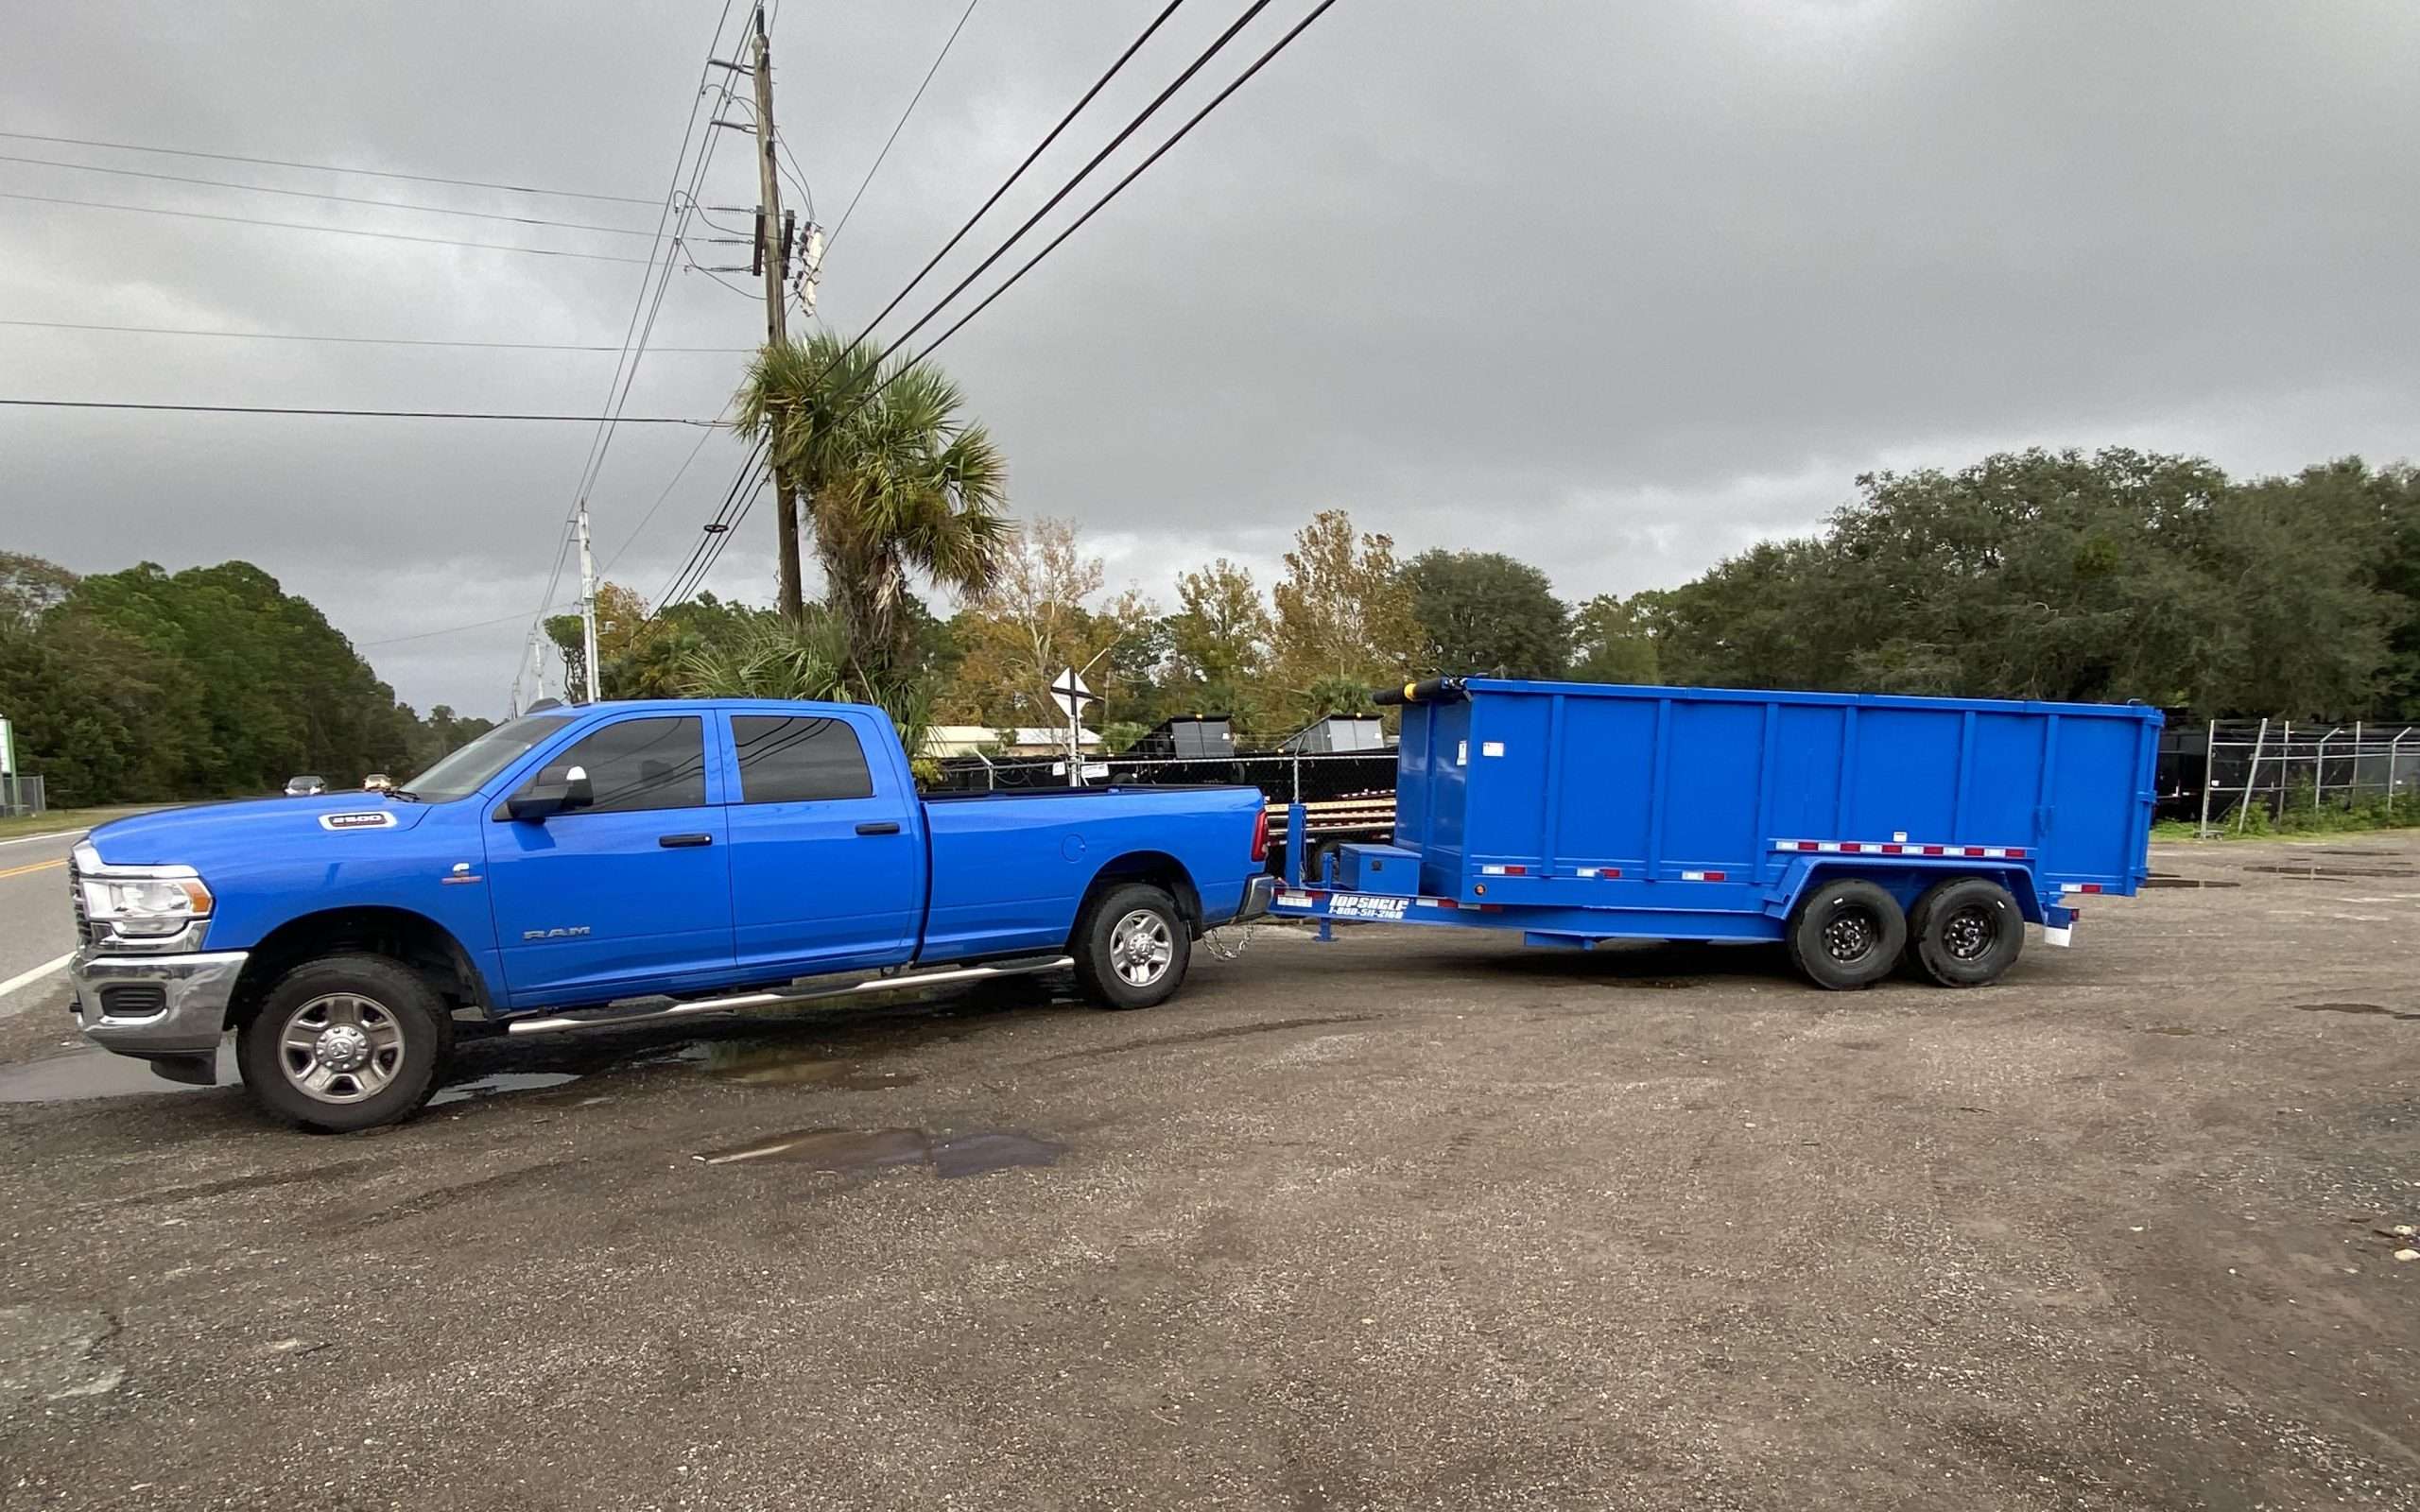 Top Shelf Trailers offers a wide variety of great colors for their dump trailers advertised at no additional charge!